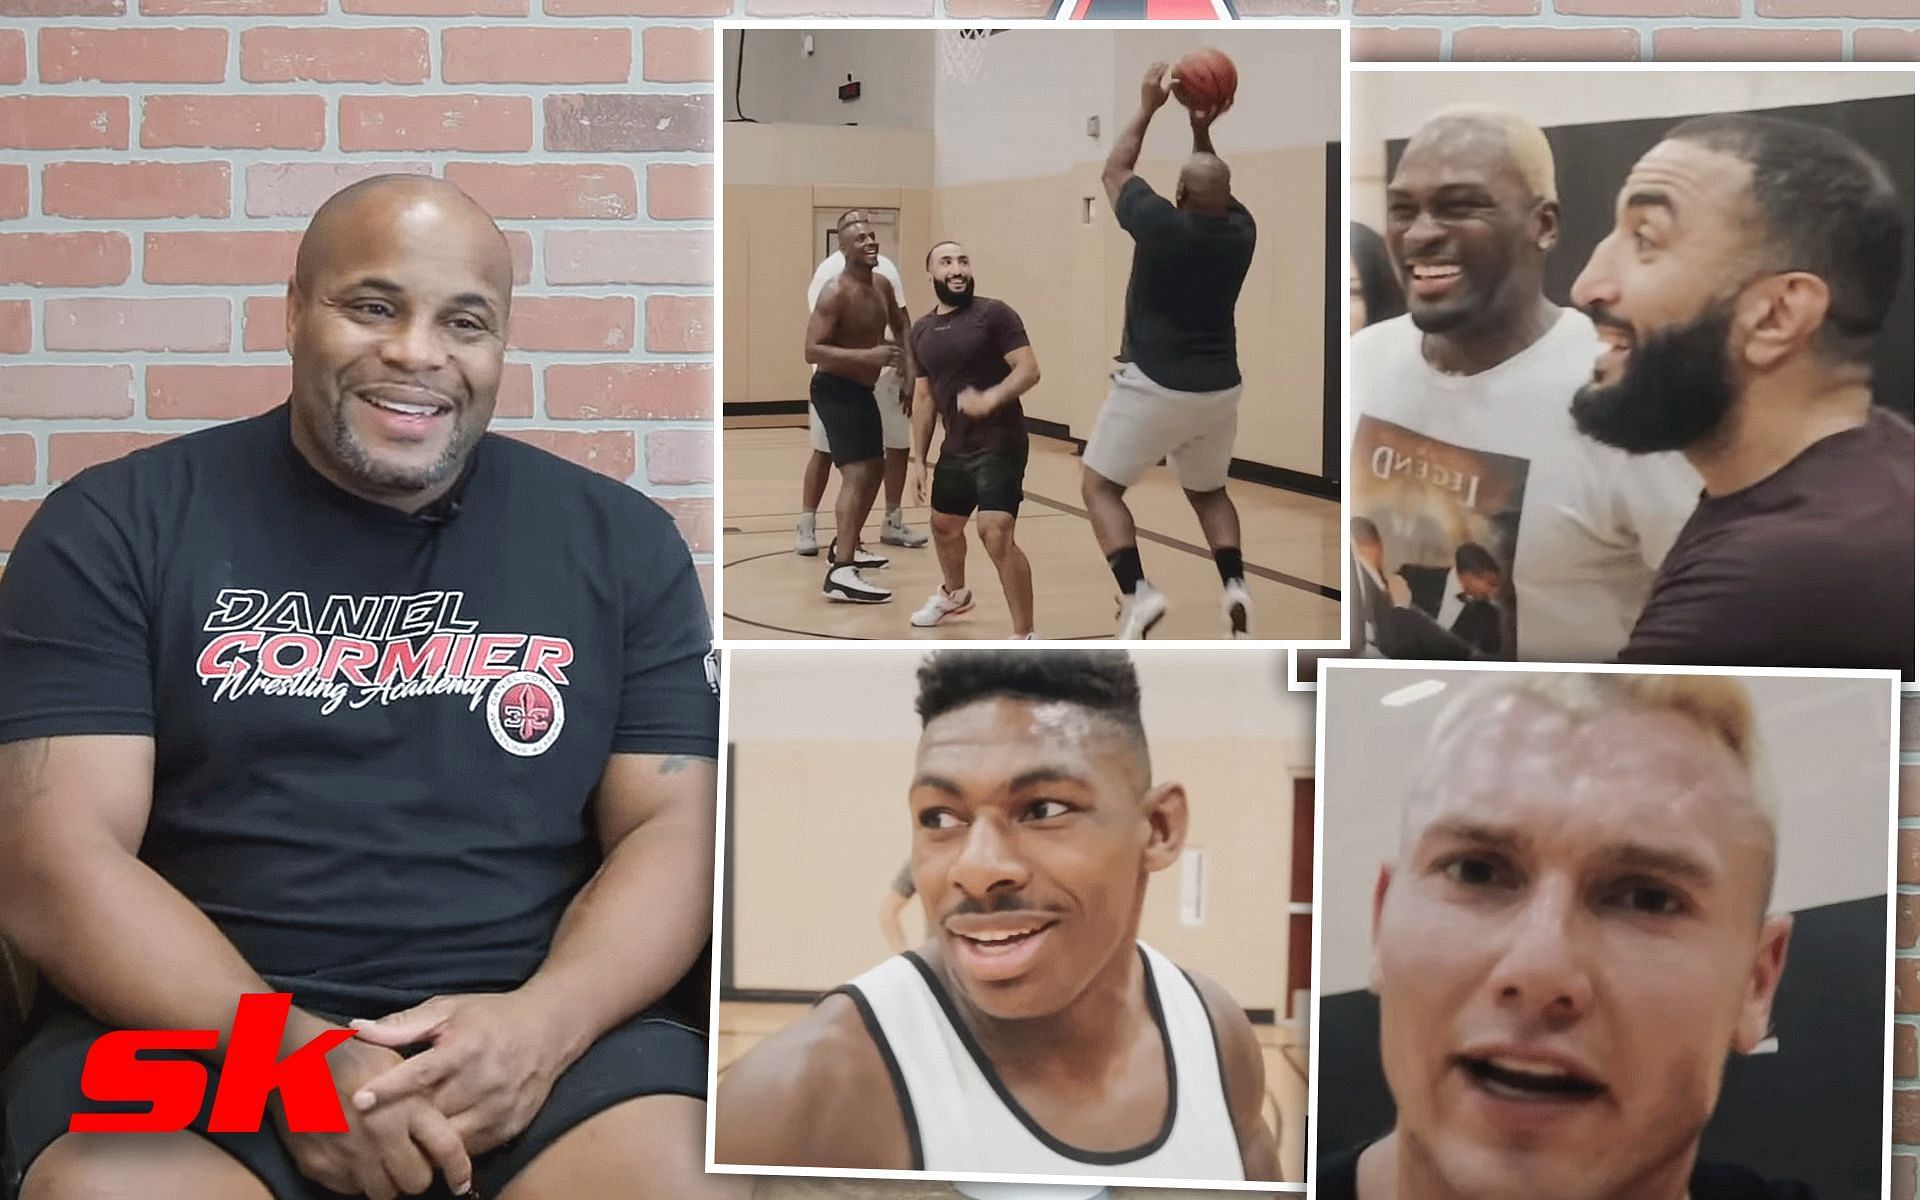 Daniel Cormier uploads a video of a basketball game with Belal Muhammad and more [Photo credit: Daniel Cormier on YouTube.com]